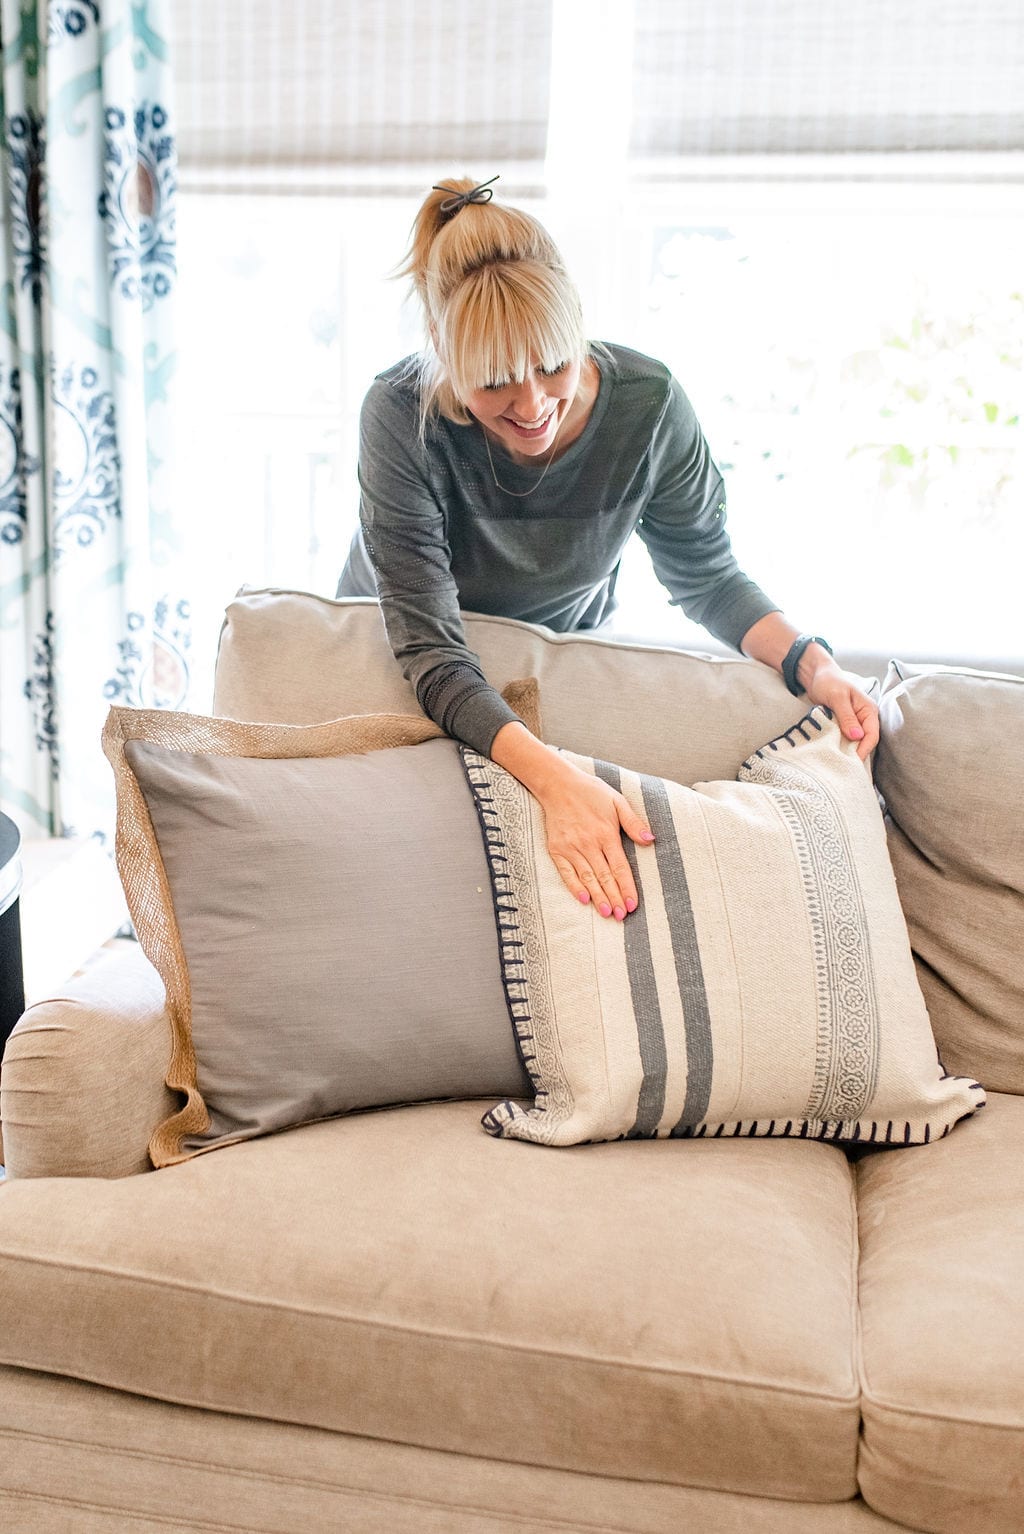 Embroidered stripe throw pillows. Love this blue and white throw pillow from Wayfair! Tips to change up your couch and family look colors without a big budget!